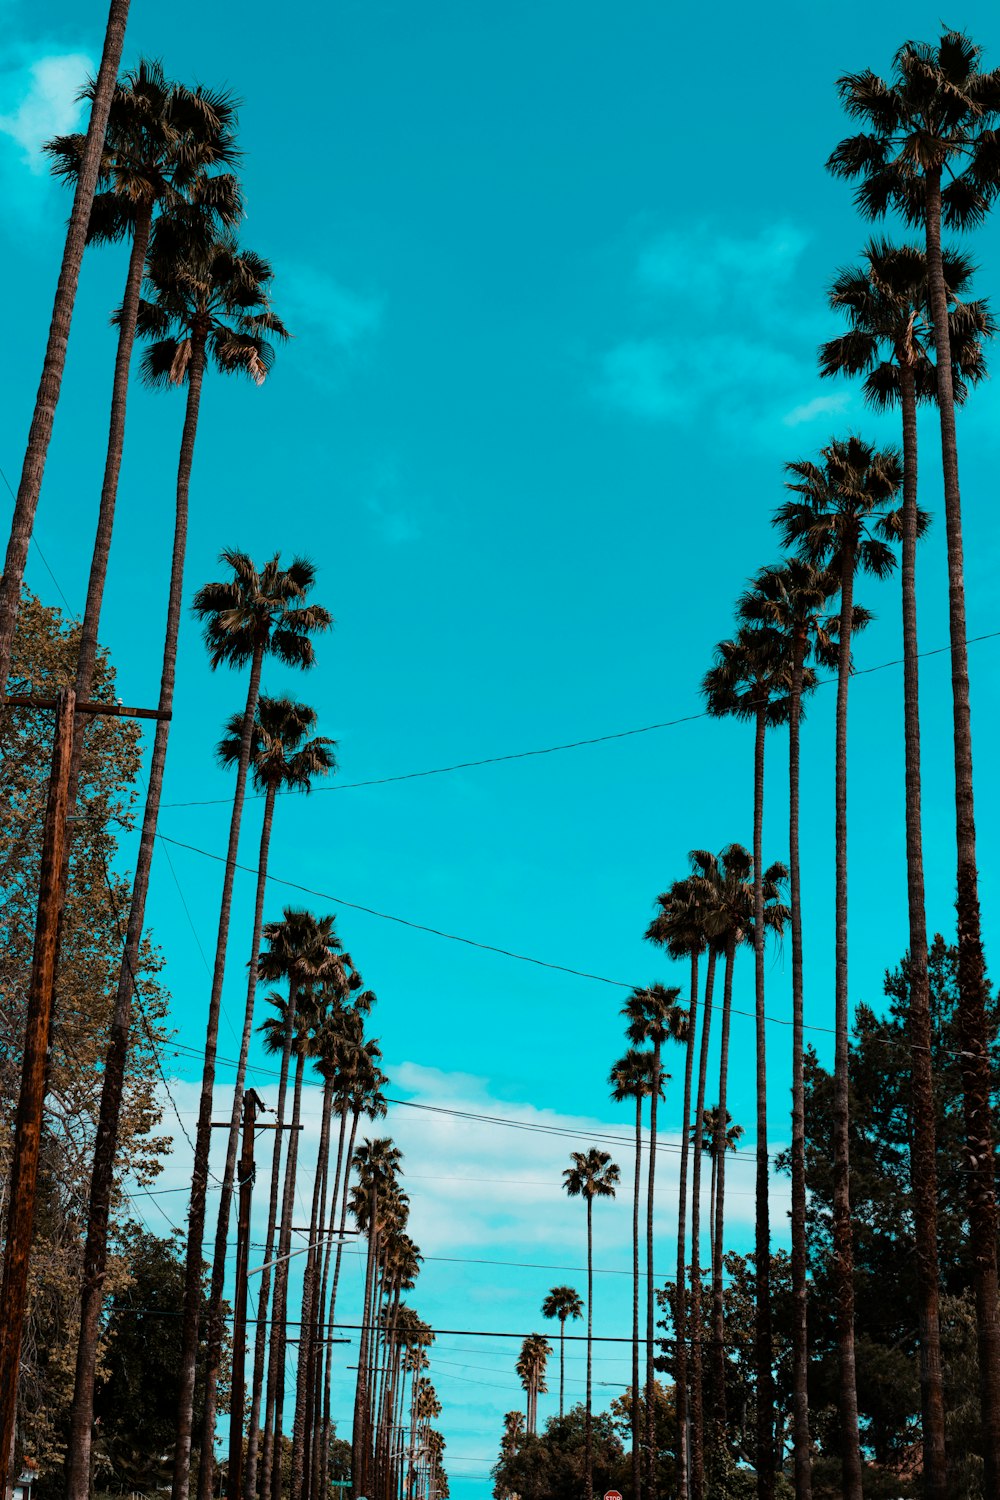 green palm trees under blue sky during daytime